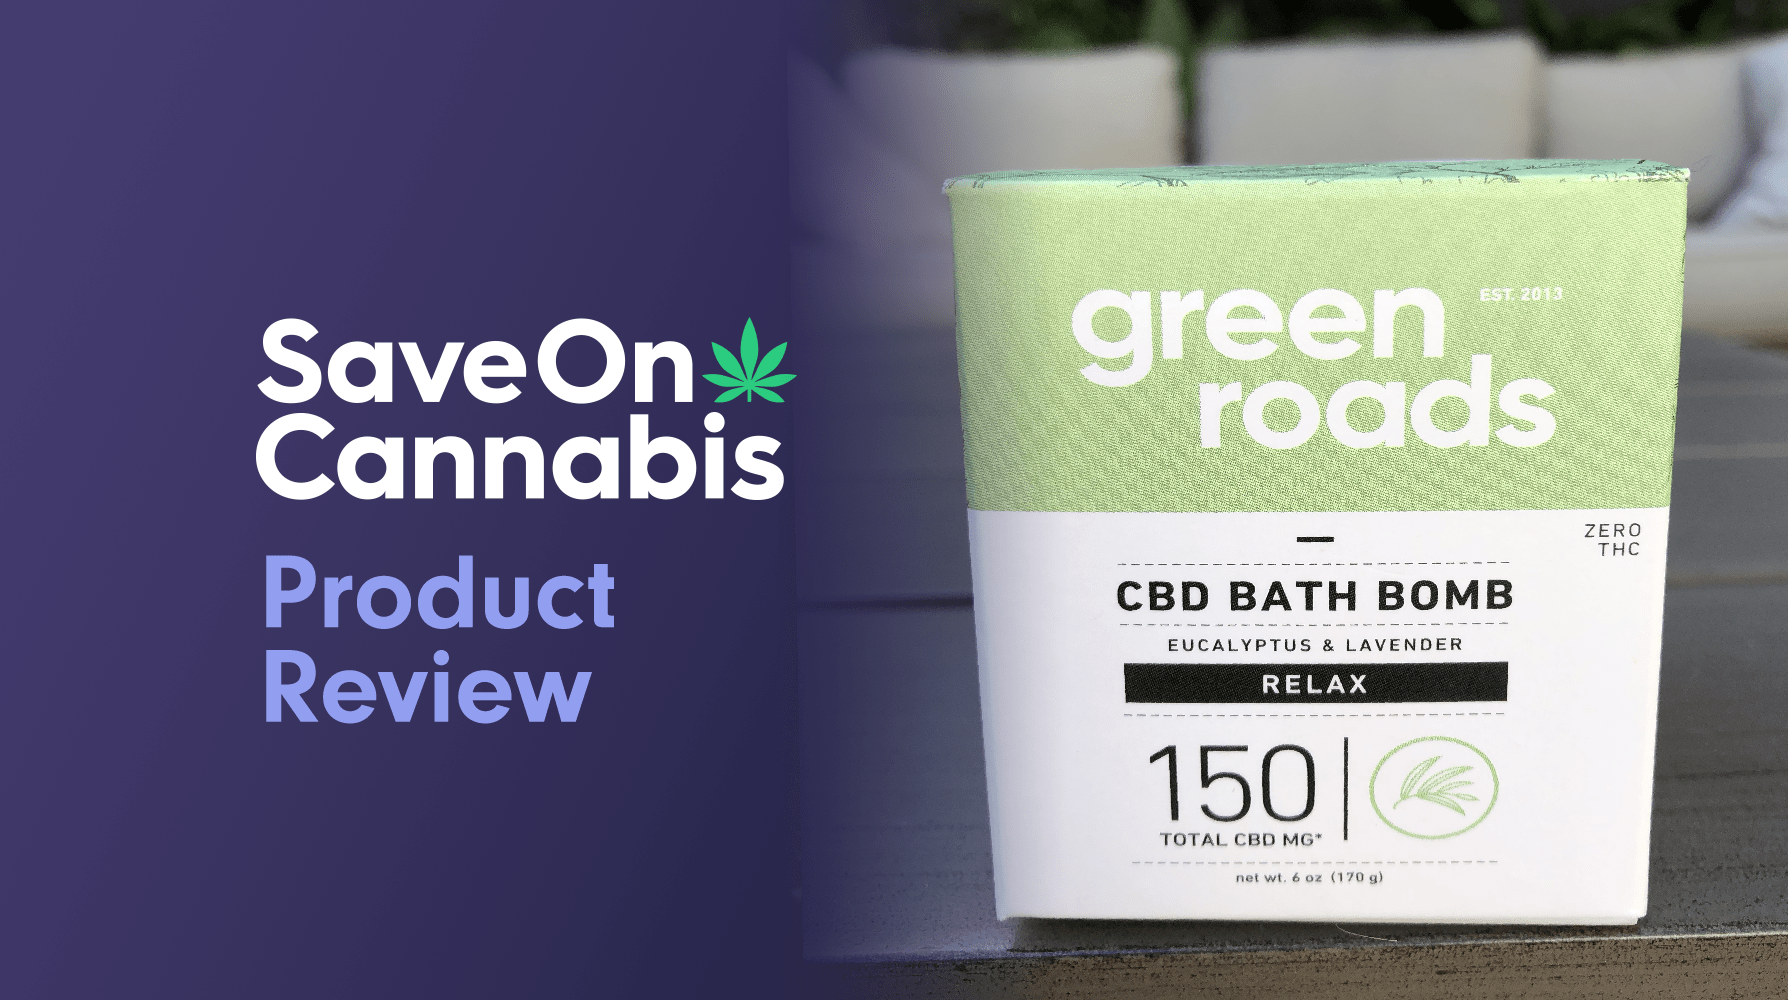 green roads 150 mg relax cbd bath bomb eucalyptus and lavender review save on cannabis website